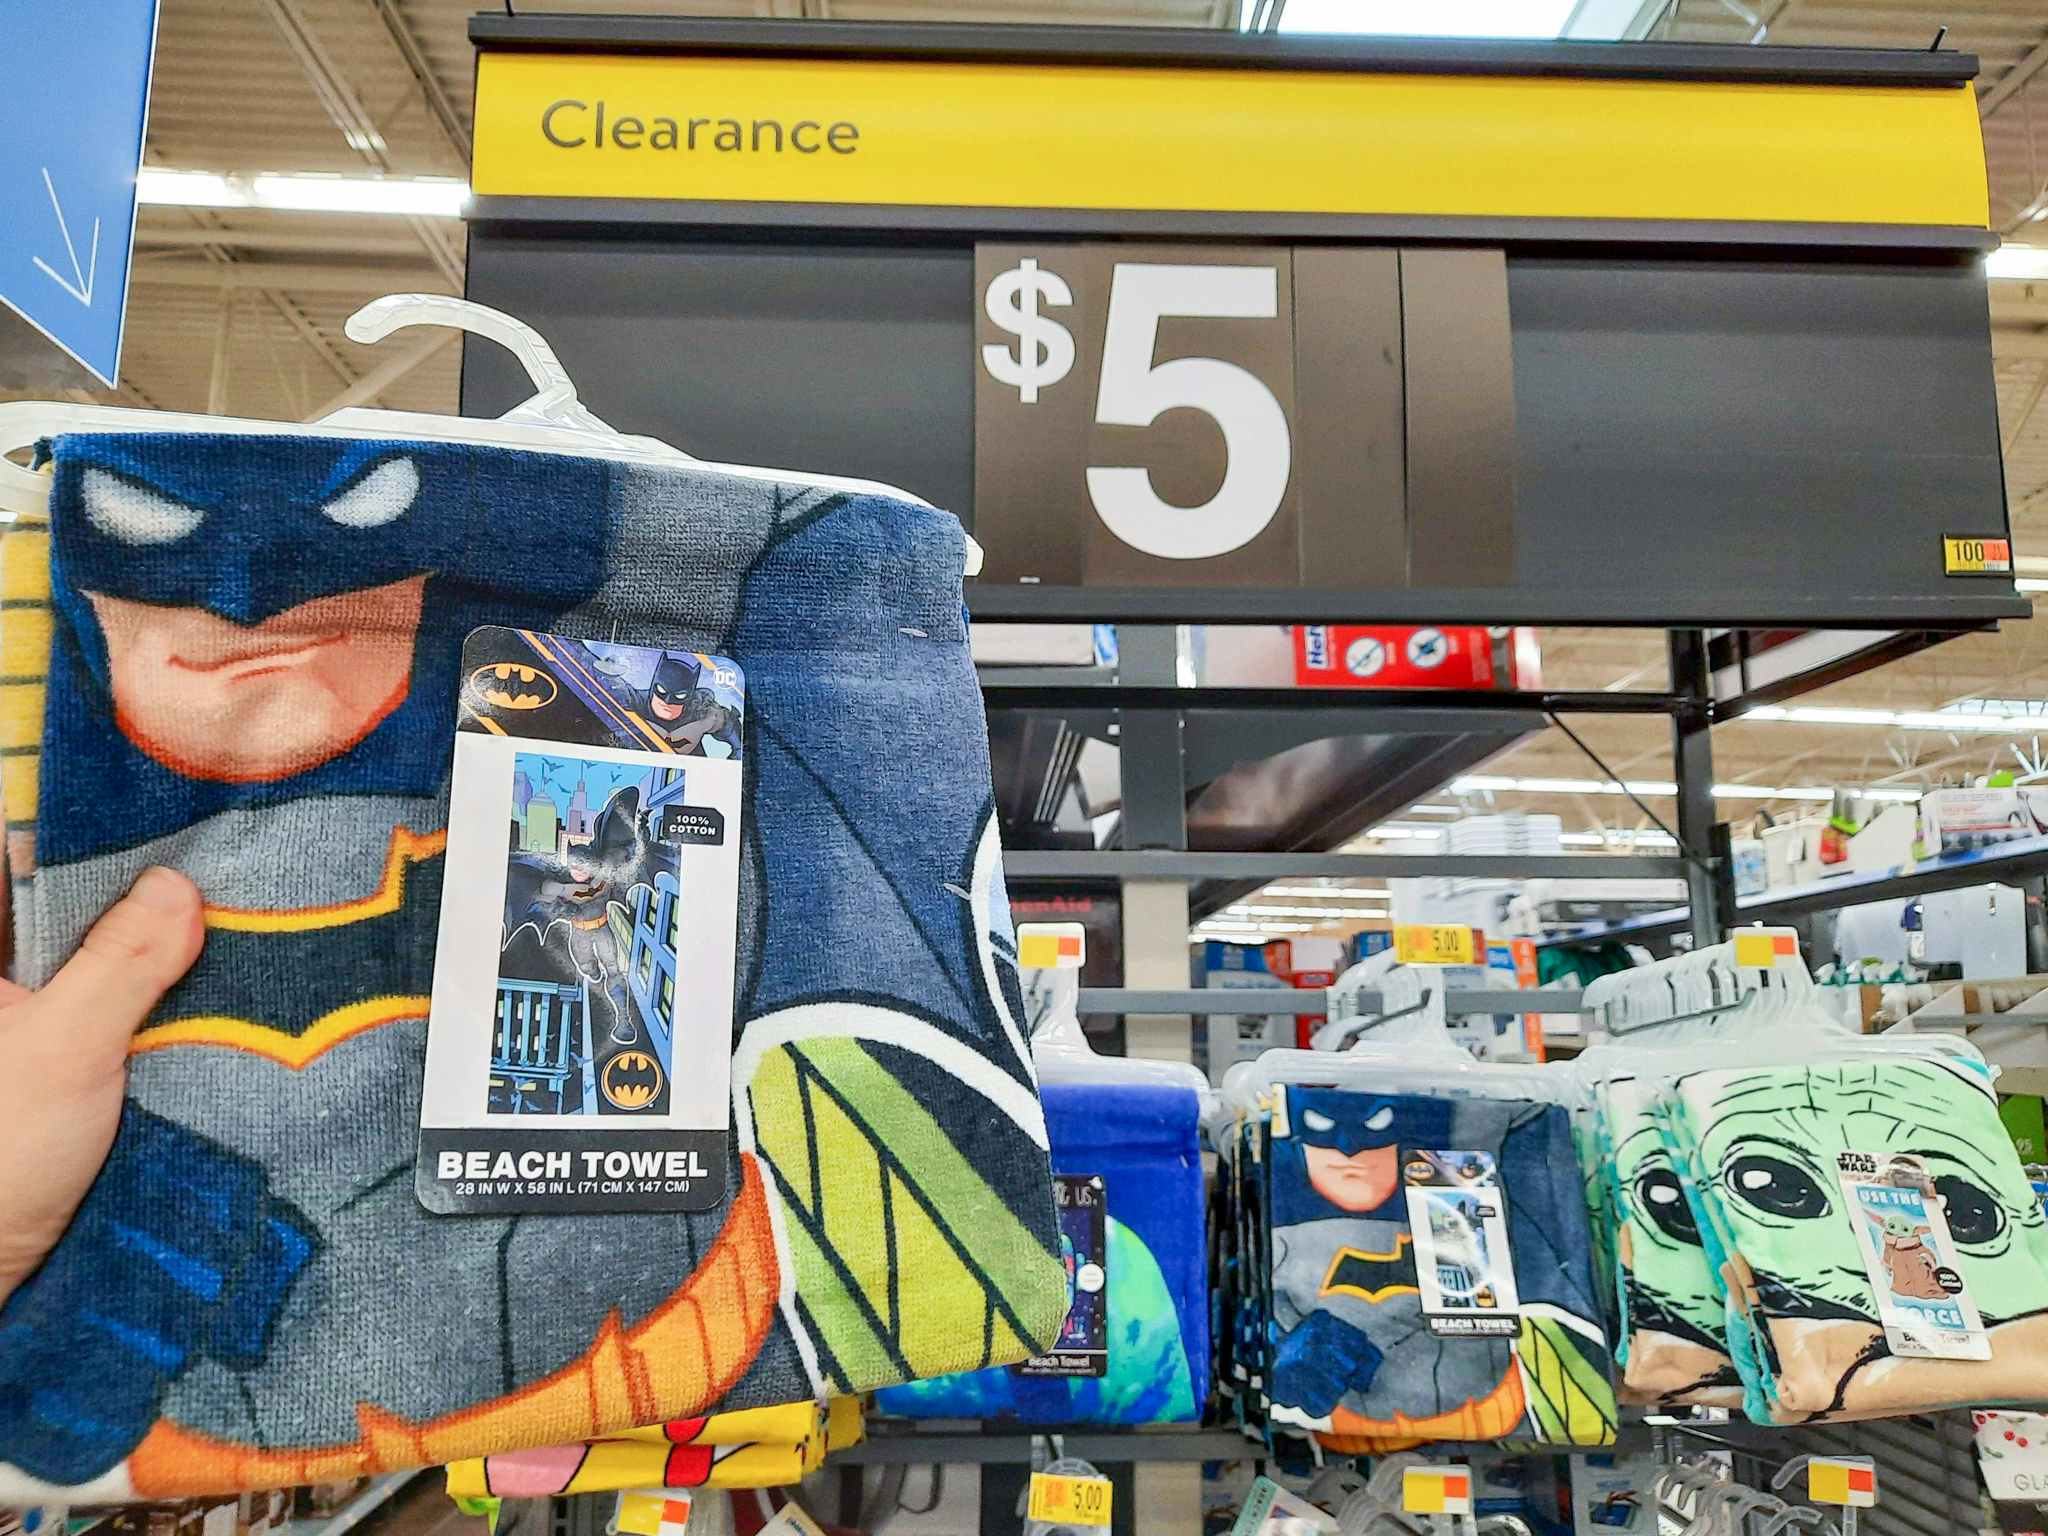 Batman Beach Towel held in front of $5 clearance sign.